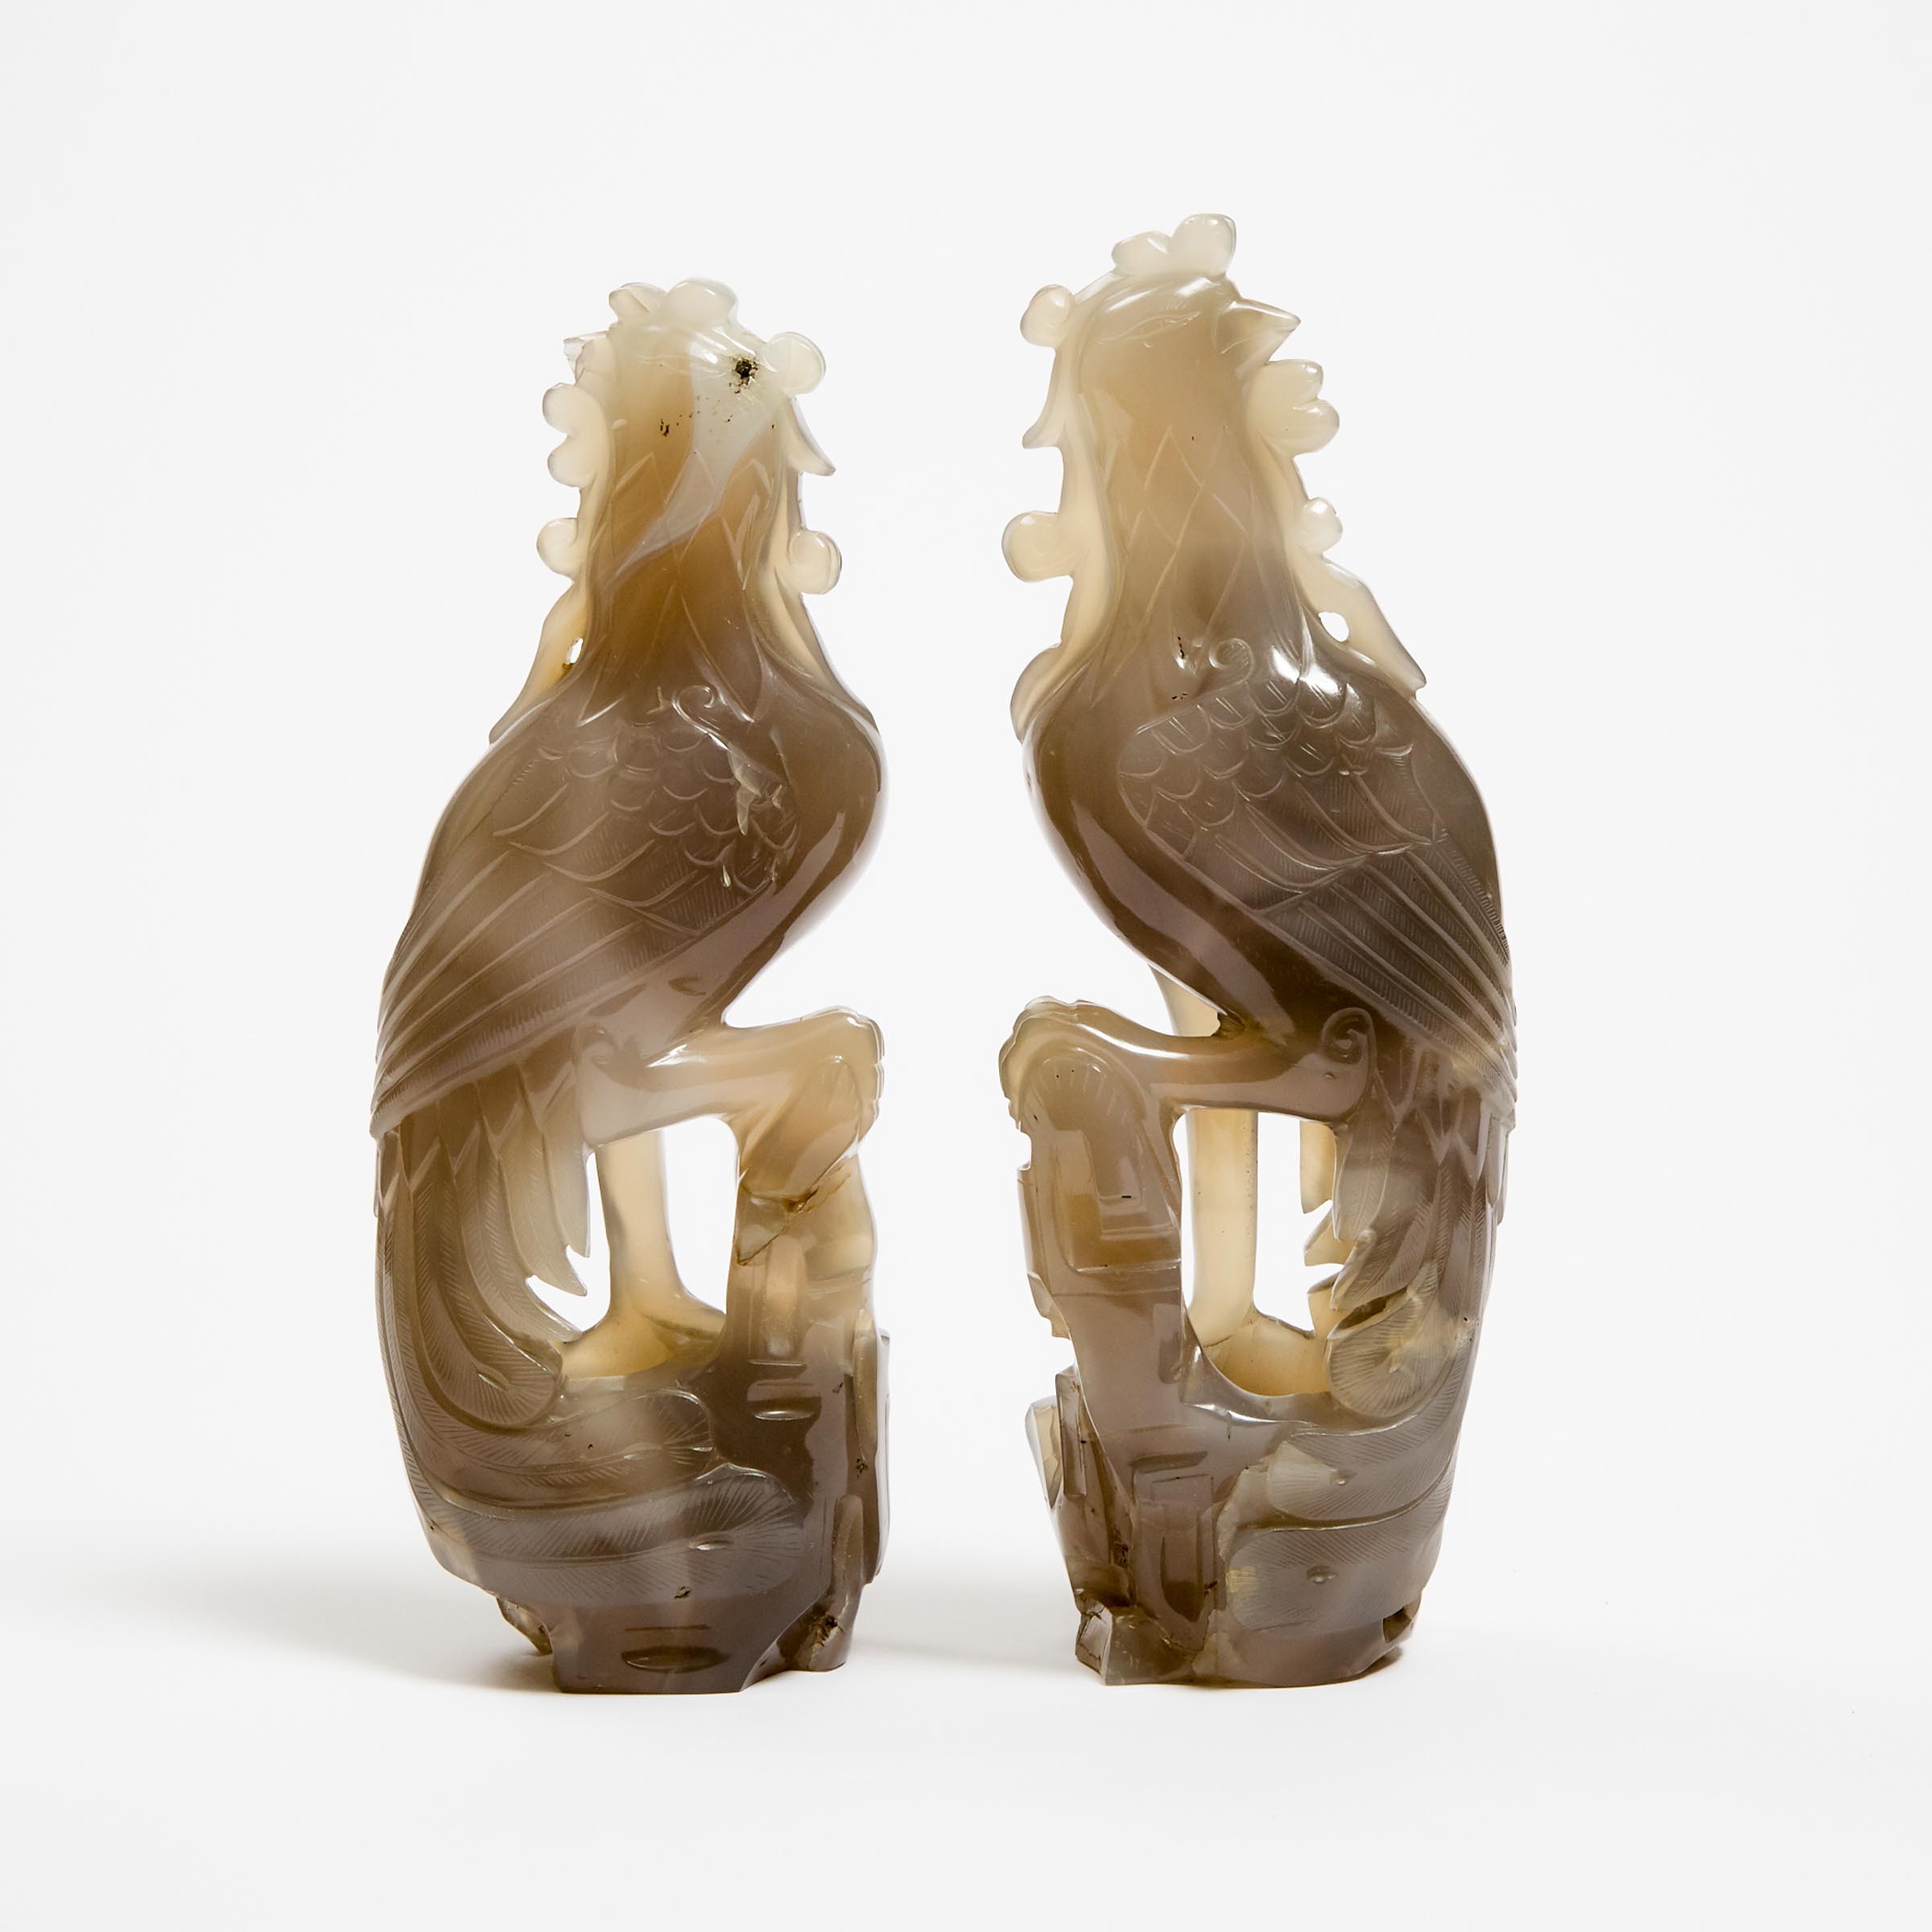 A Pair of Agate Phoenixes, Mid 20th Century